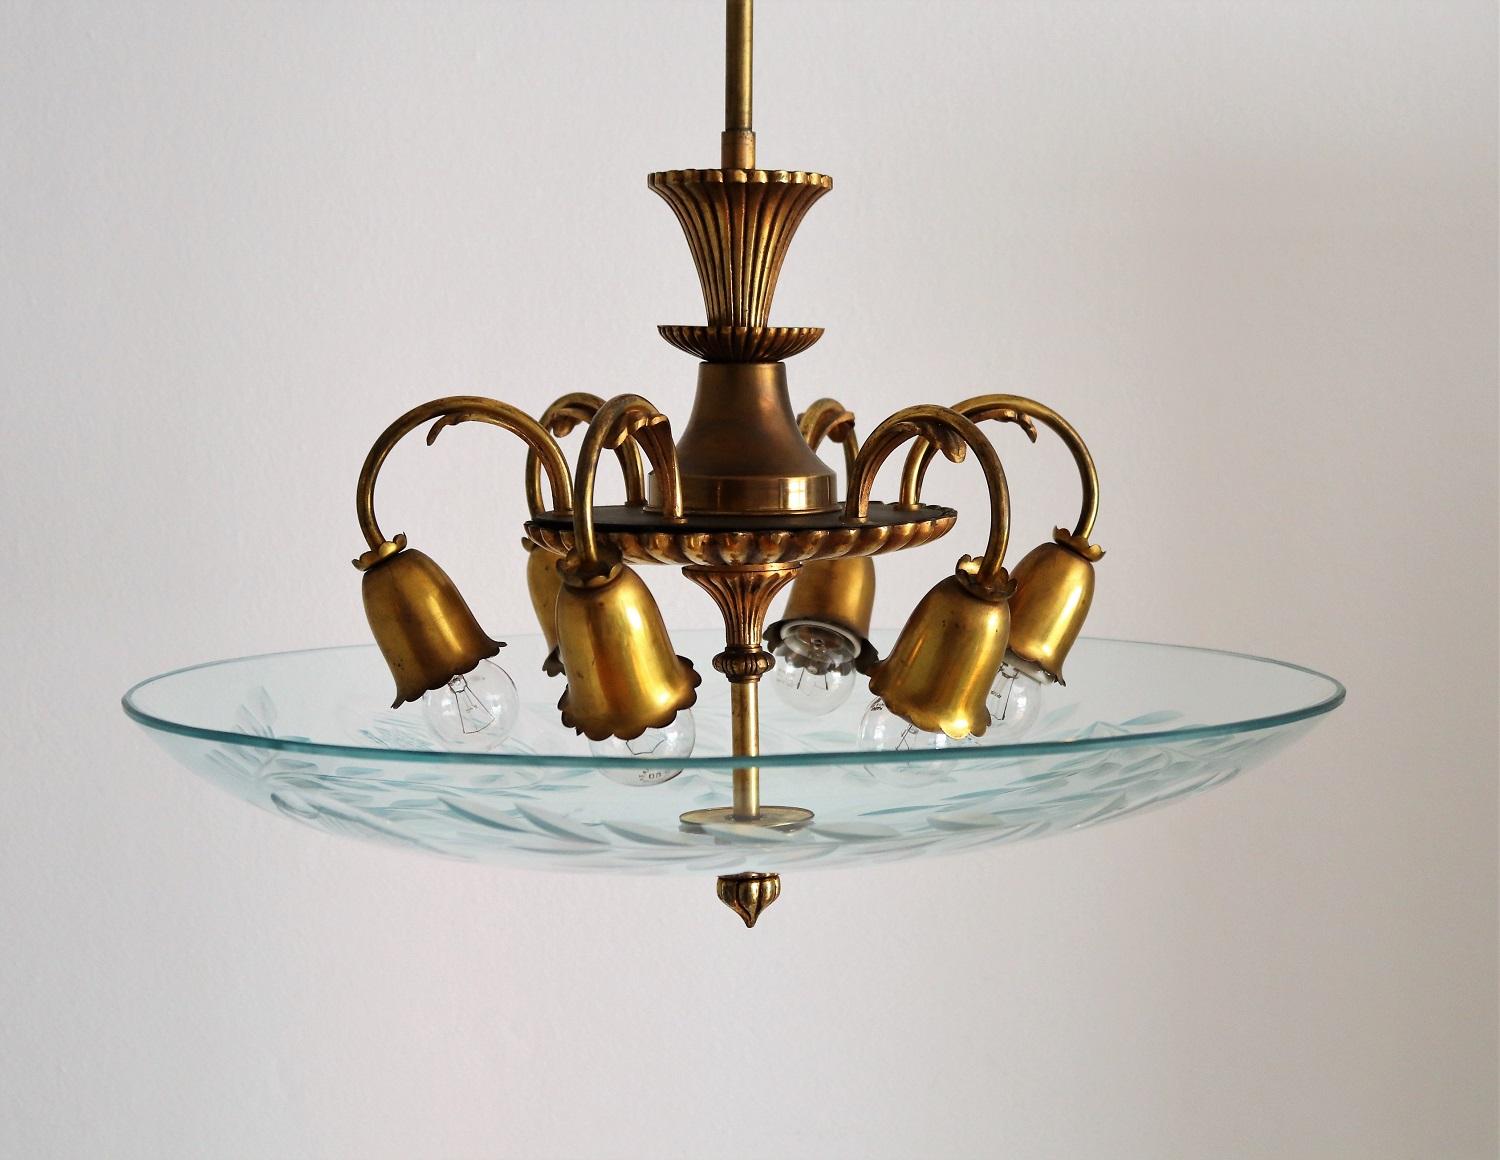 Italian Midcentury Brass and Crystal Glass Chandelier, 1950s For Sale 2